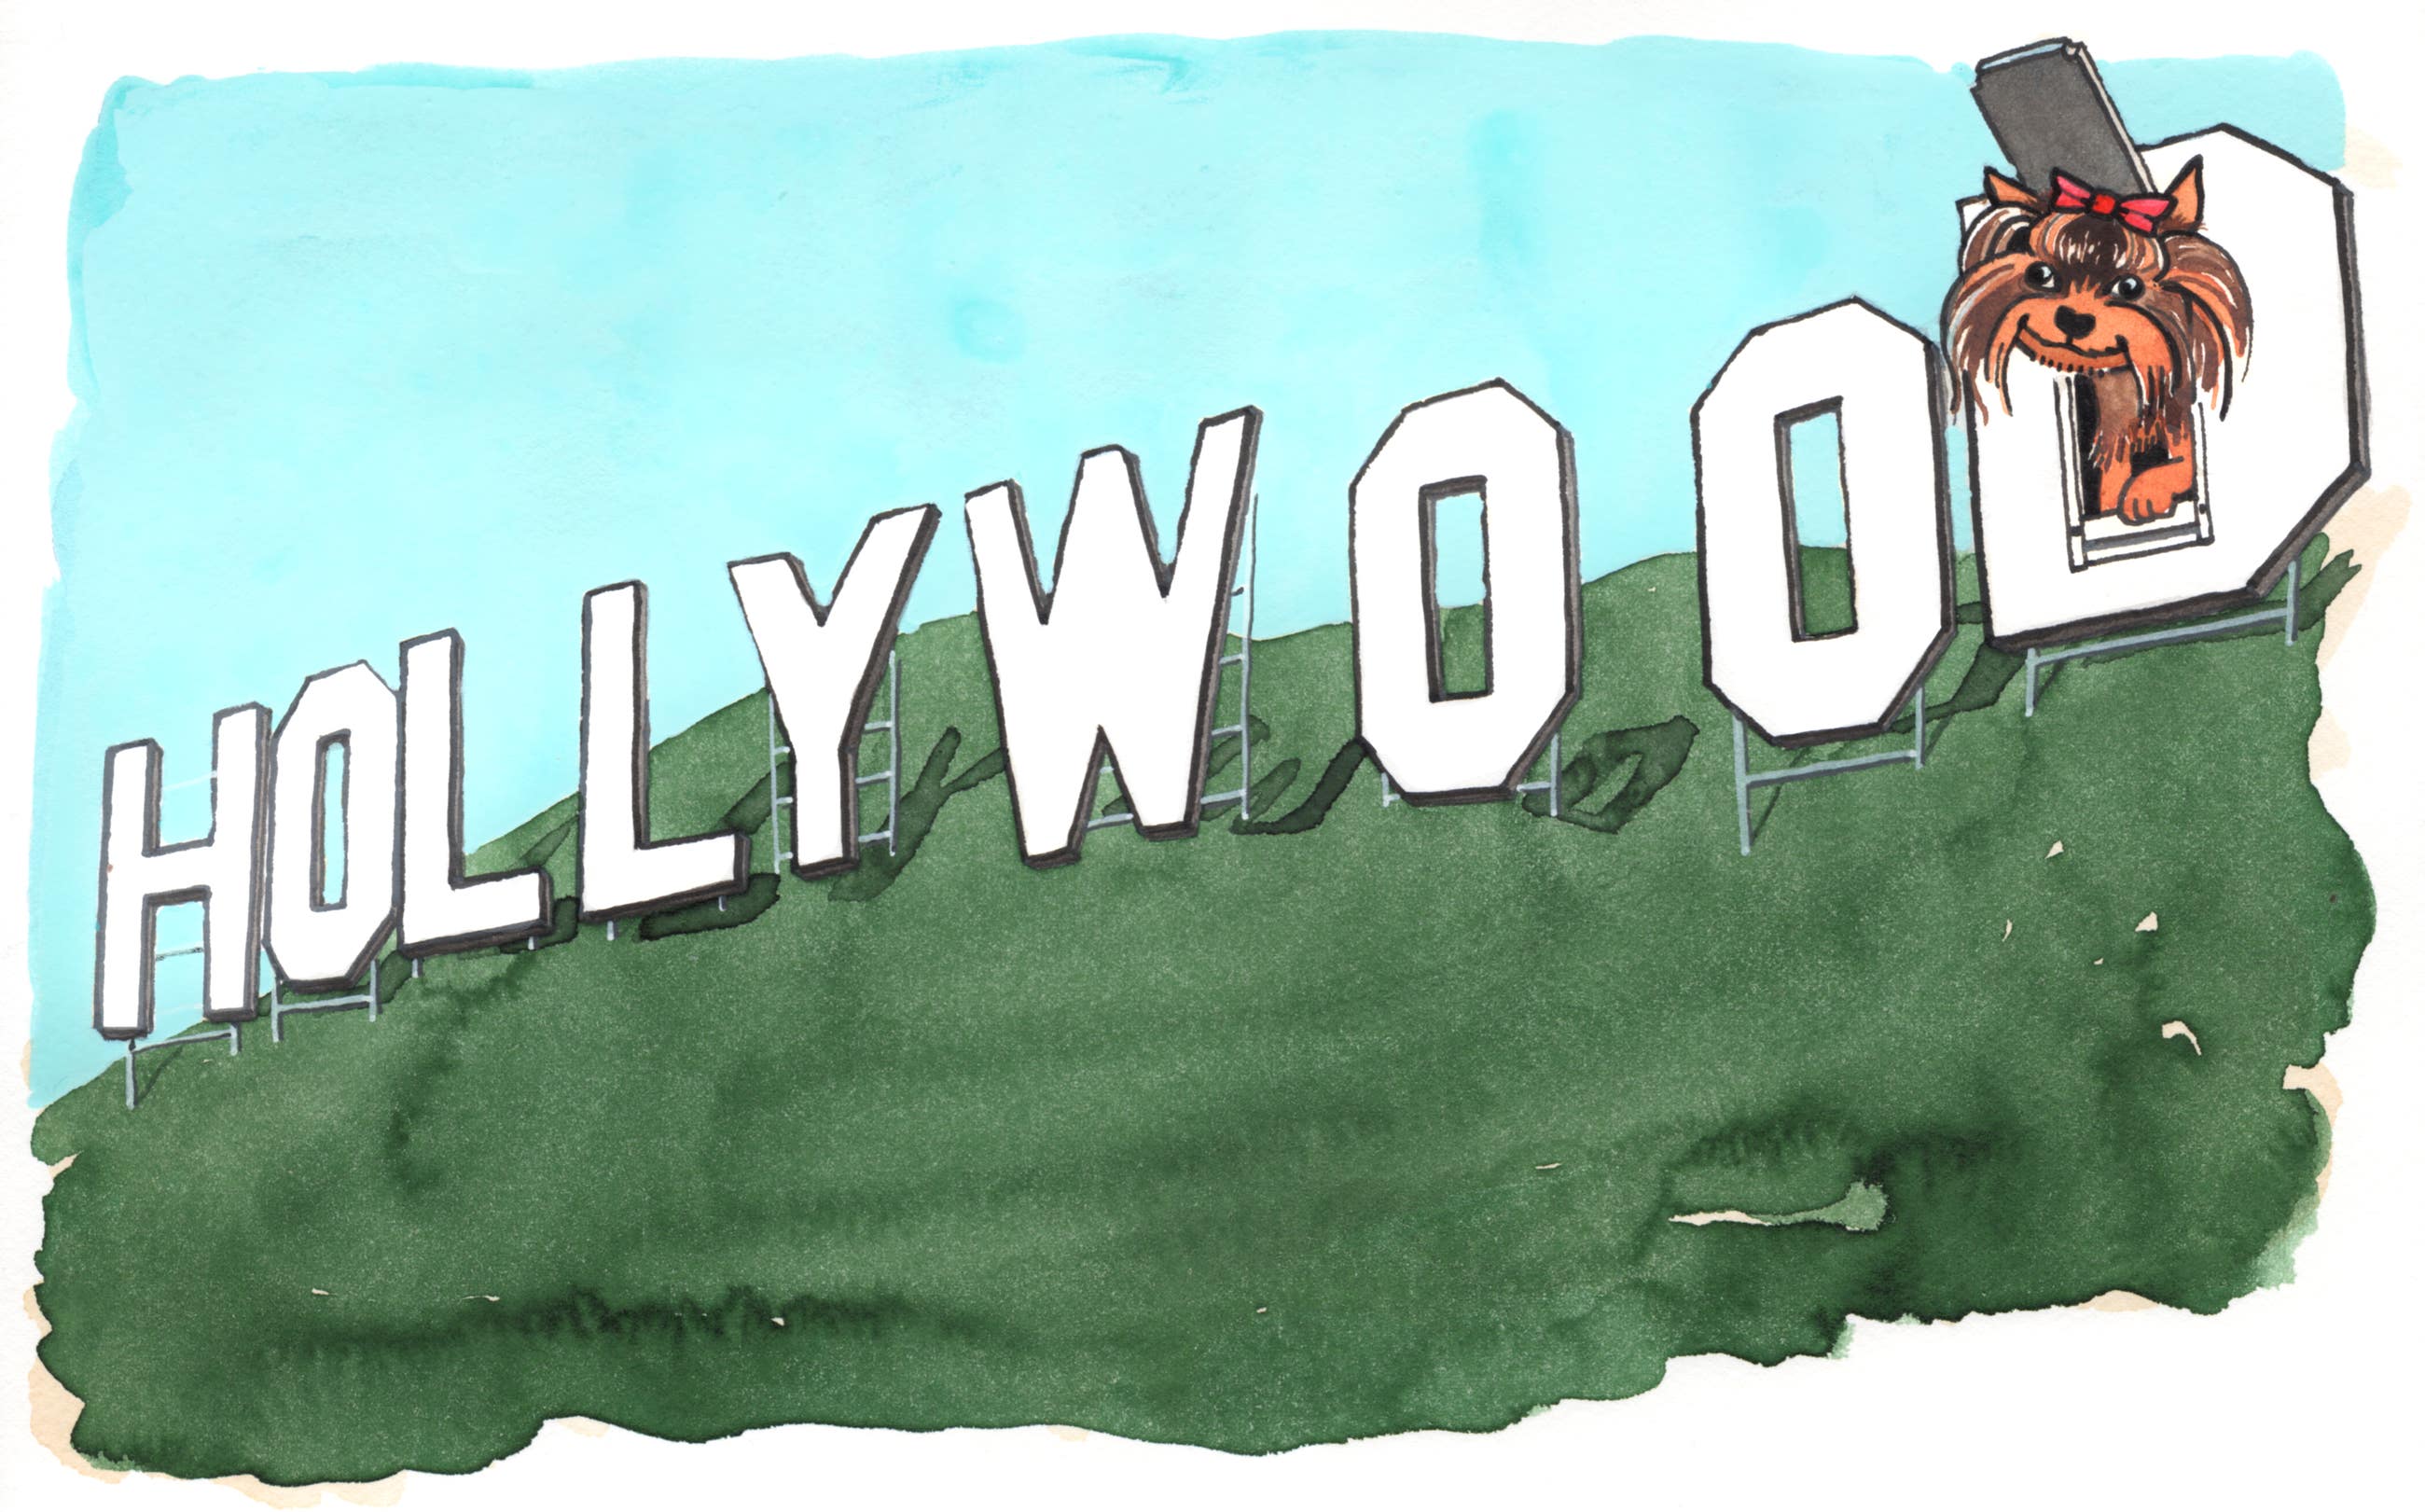 Yorkshire Terrier at the Hollywood Sign | Illustration by Max Kornell